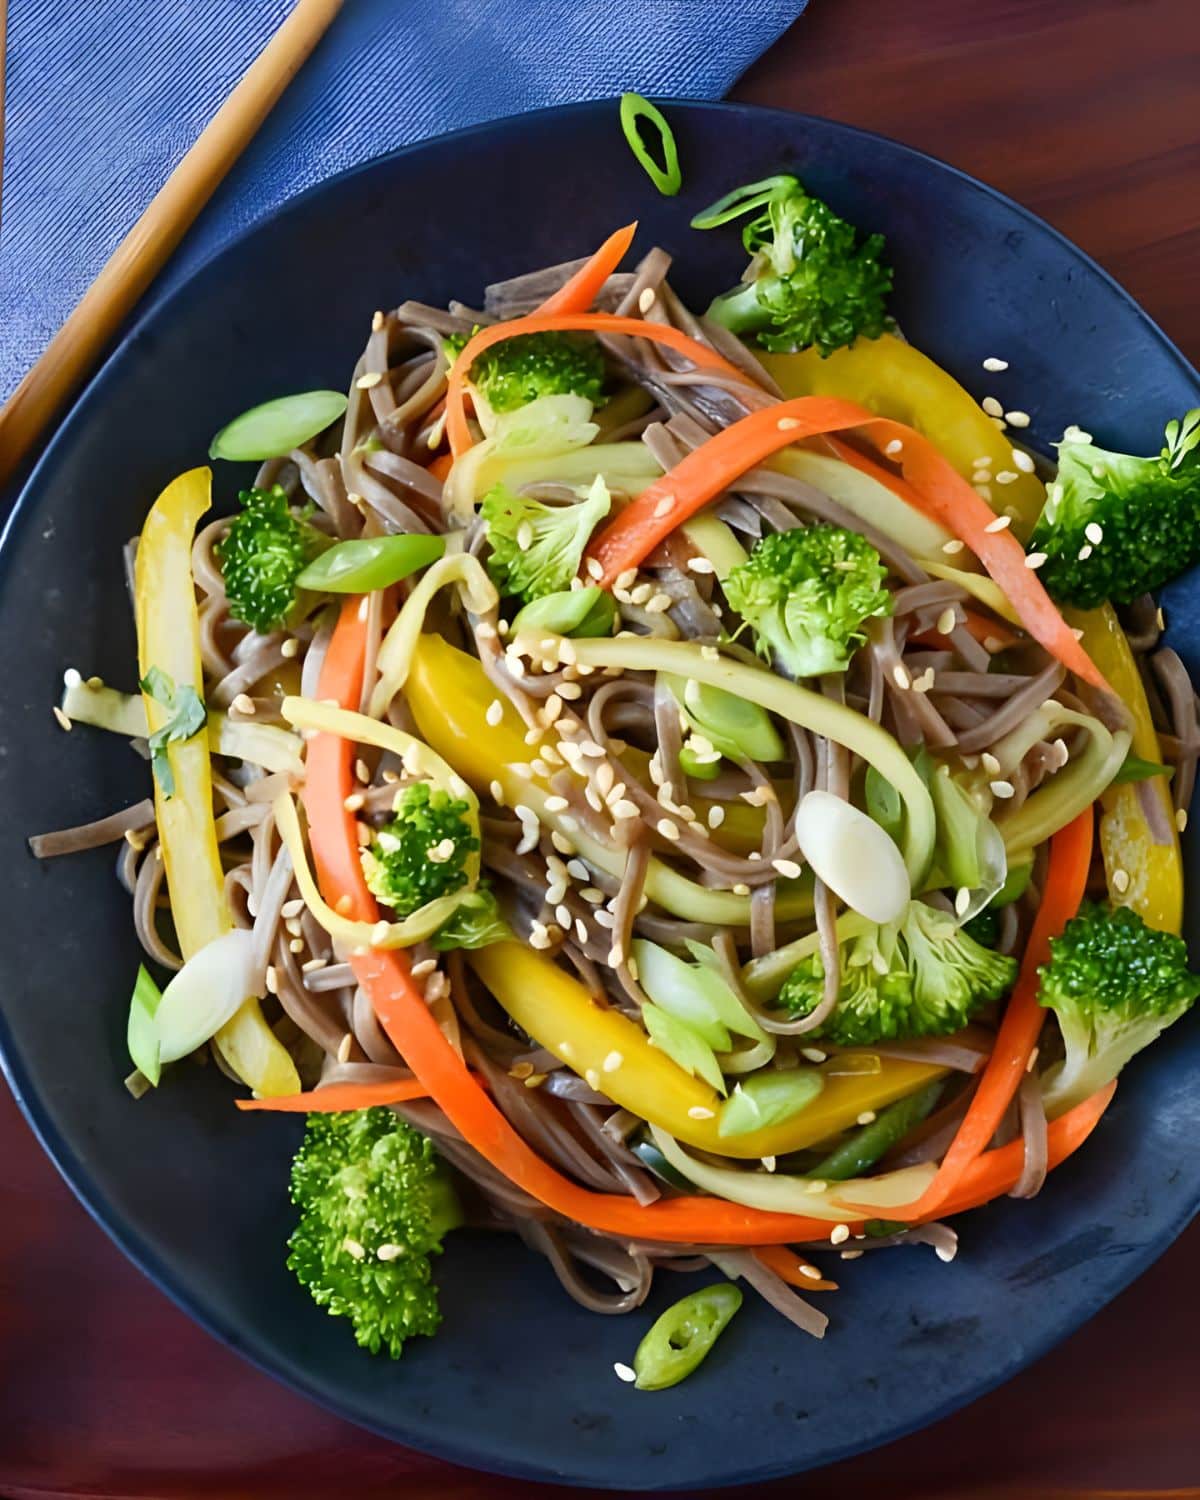 Cold soba noodle salad with fresh veggies and sesame seeds.